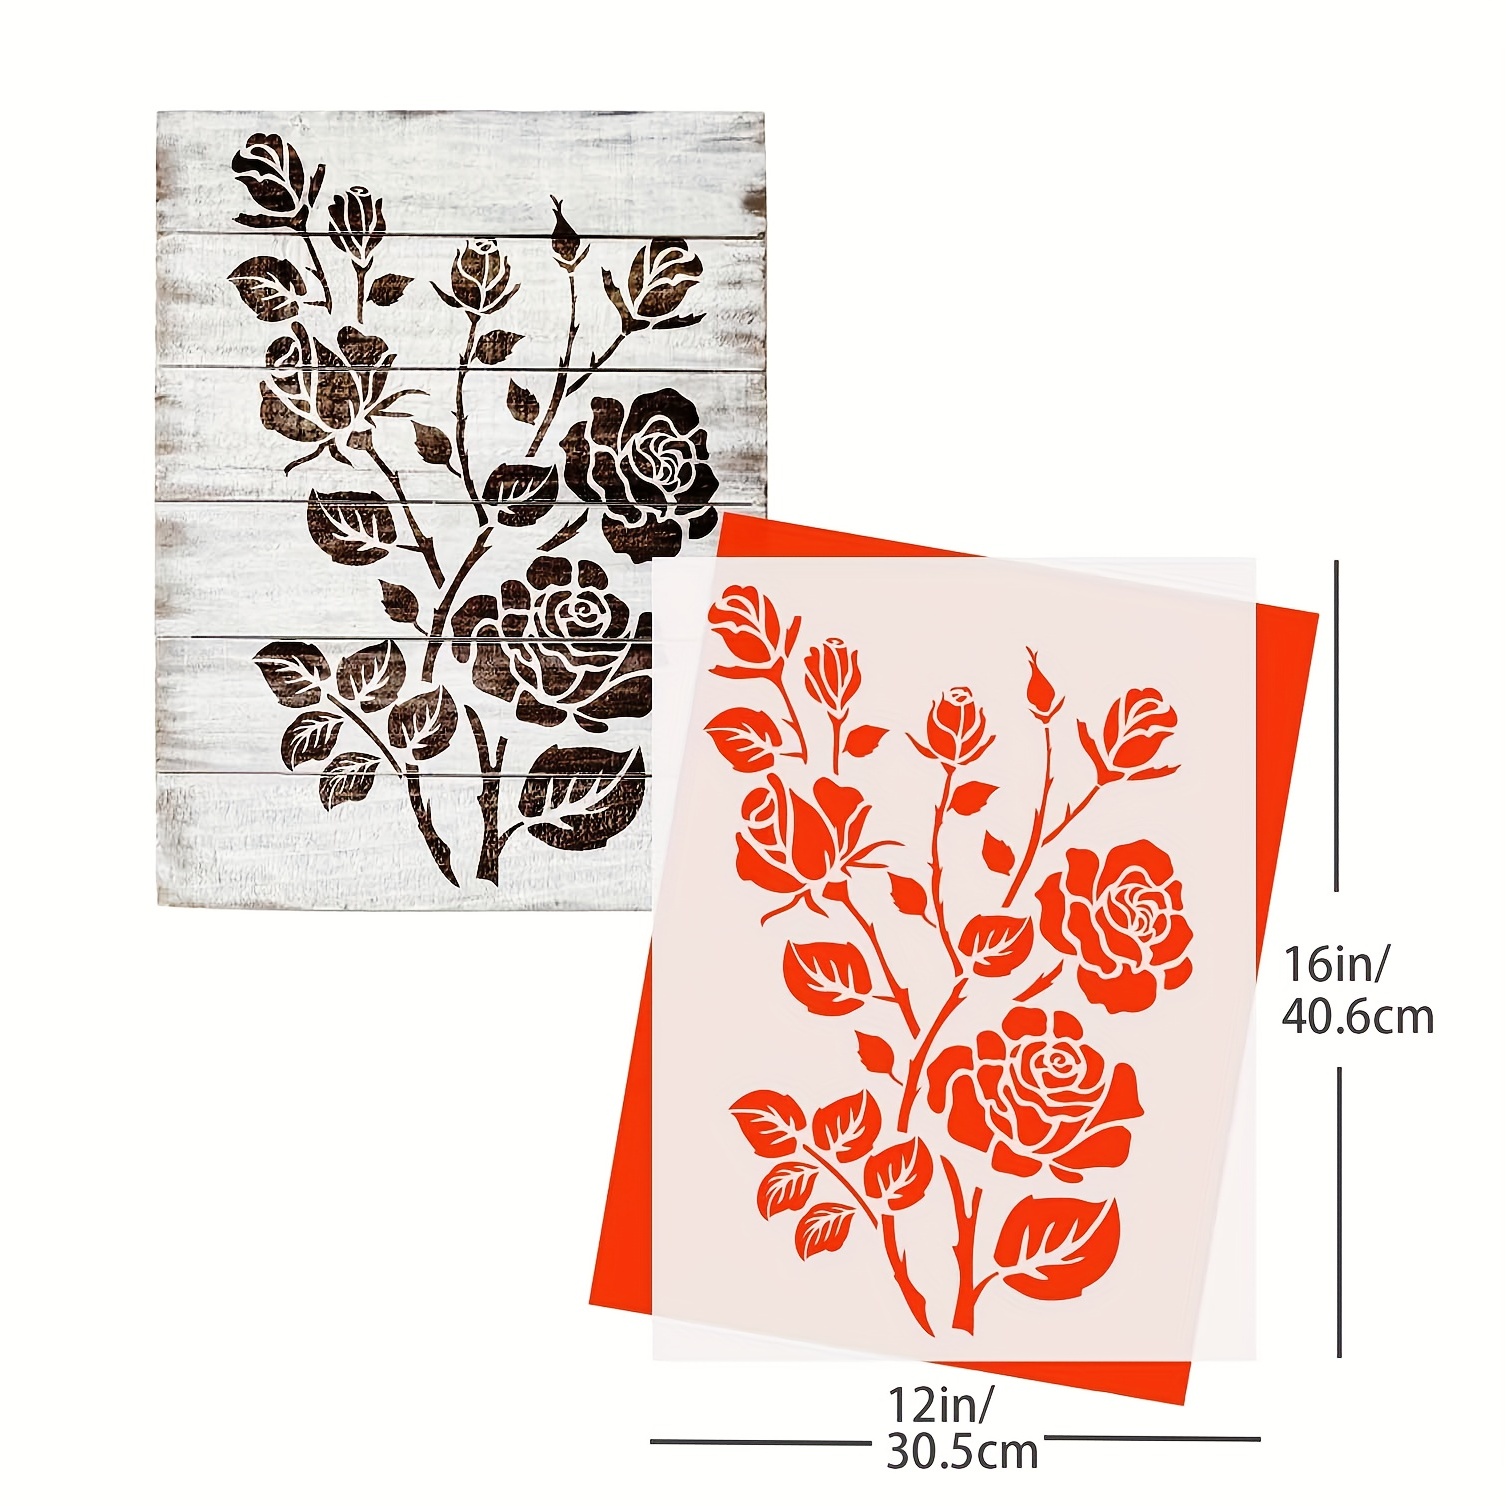 Flower Stencils for Painting on Wood, Canvas, Paper, Fabric, Floor, Wall  and Til